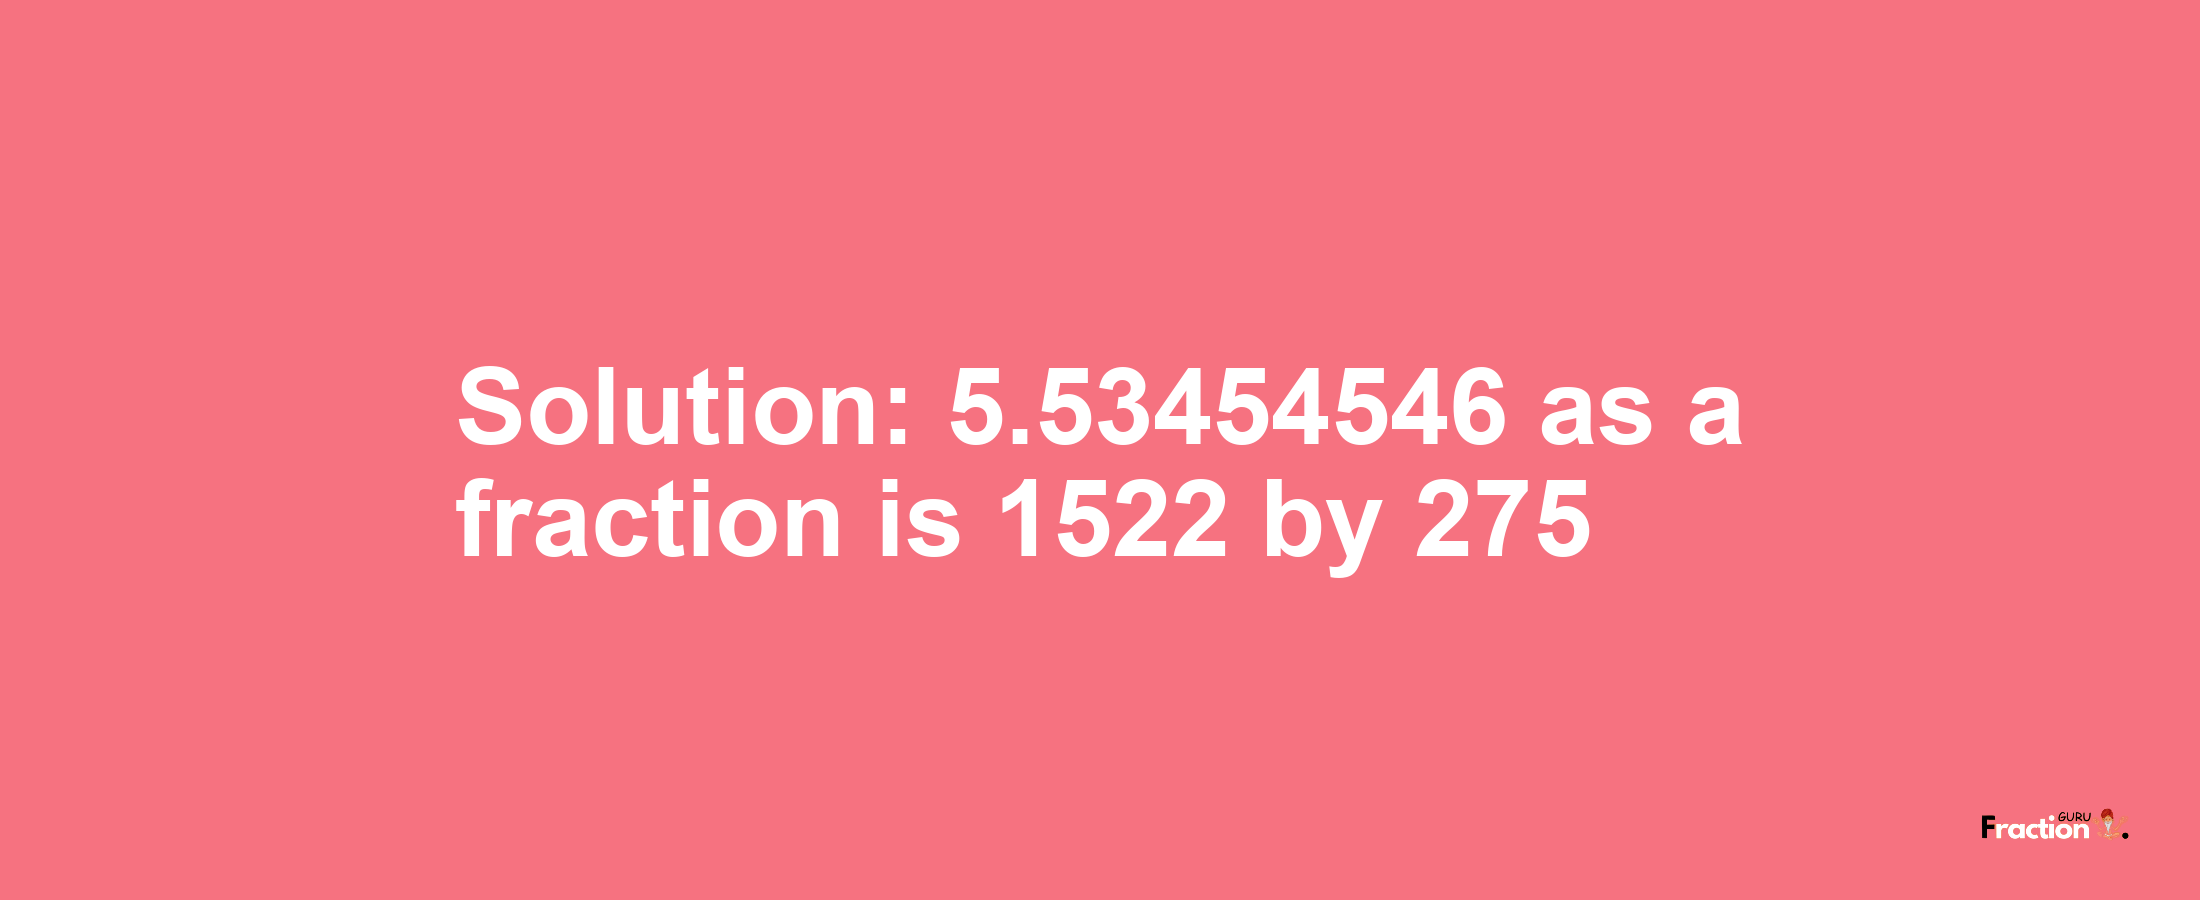 Solution:5.53454546 as a fraction is 1522/275